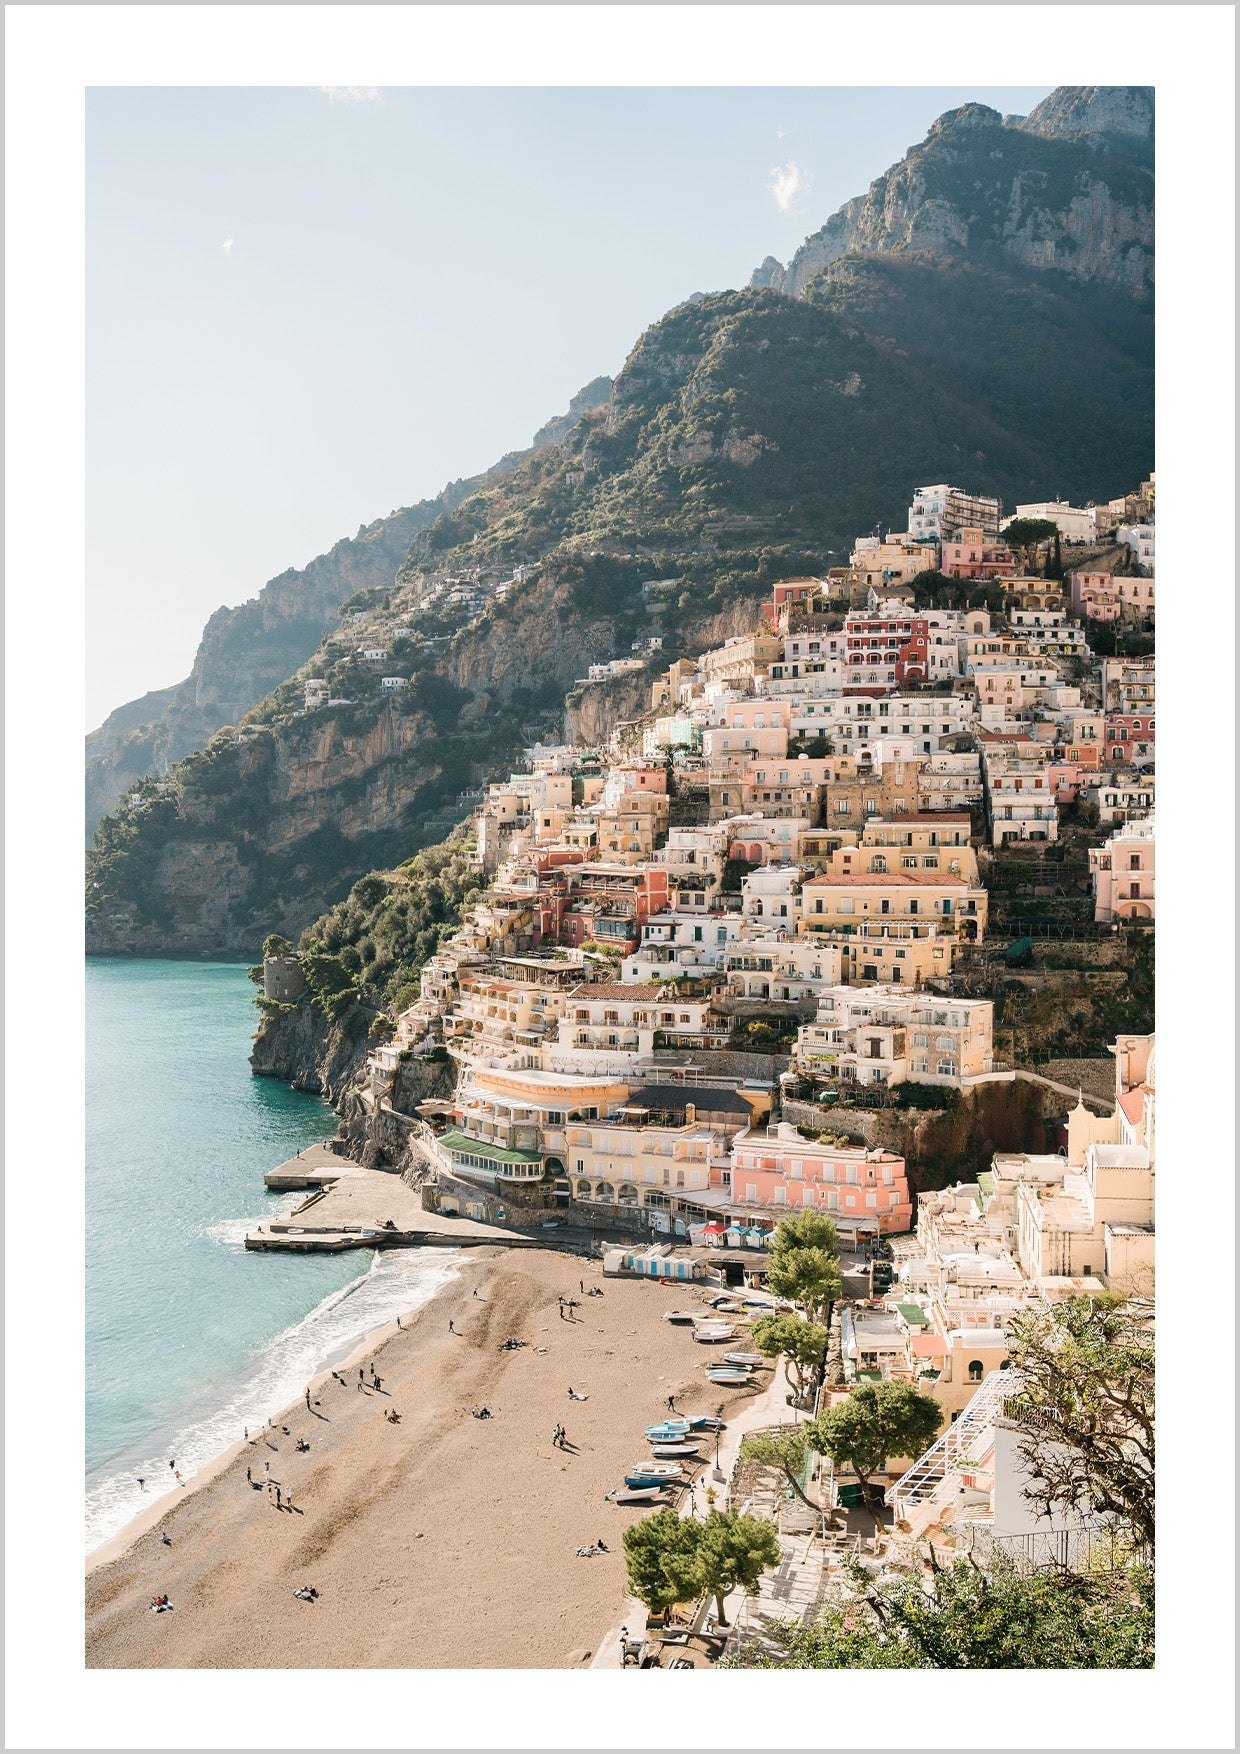 Pink houses in the city Positano. Photograph of the small city Positano surrounded by water and mountains.